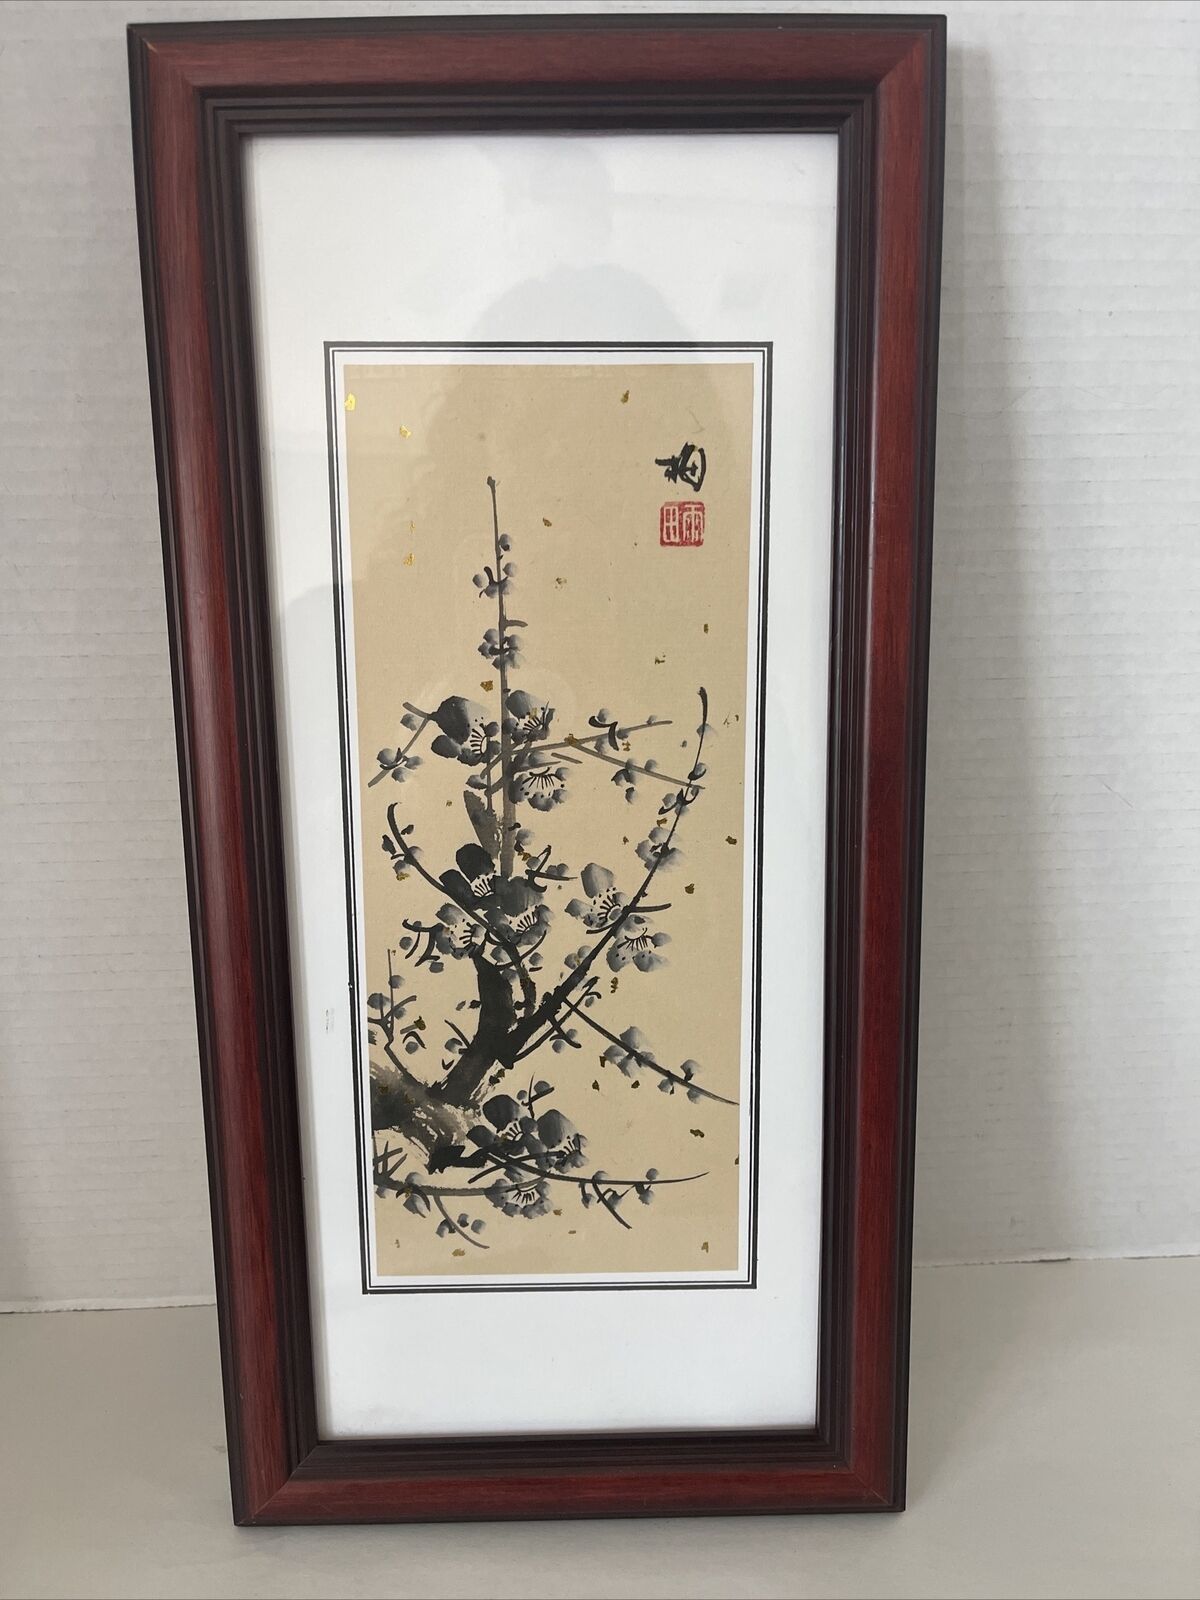 Vintage Cherry Blossom Painting Chinese Flowers Artist Seal Framed 16x7.5”